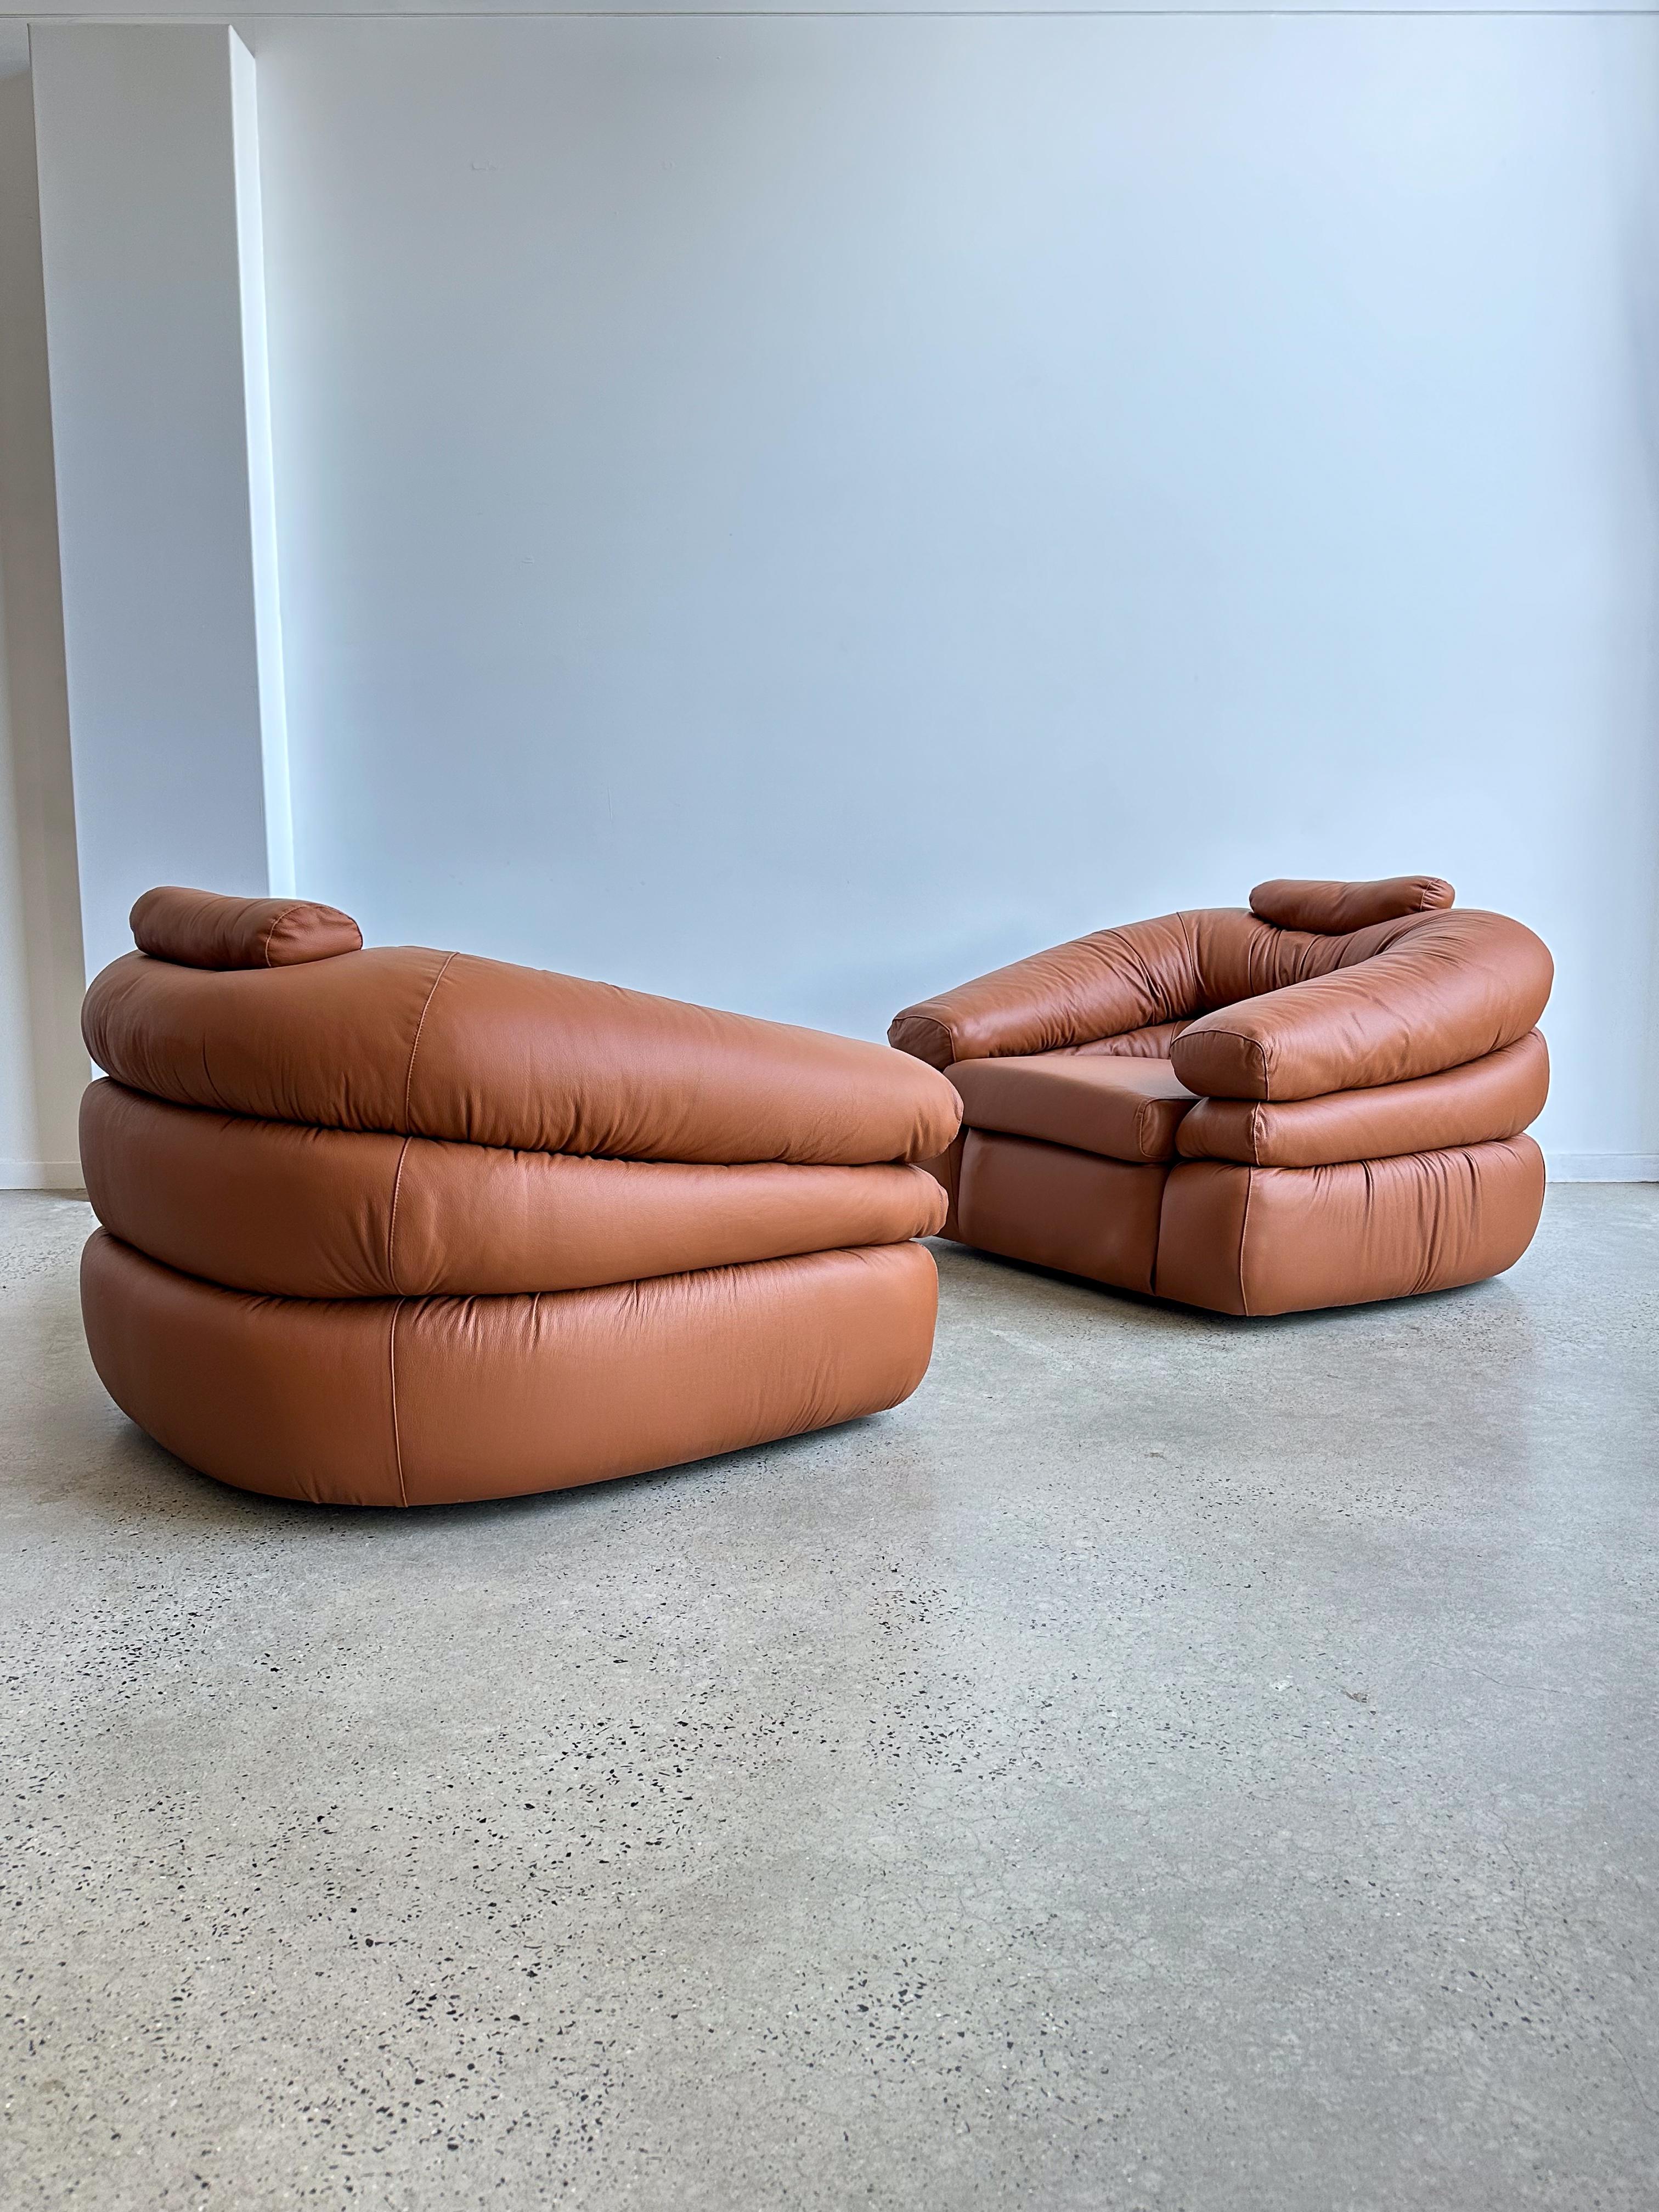 This stunning rare two armchairs Leather were designed 1968 by Design Team De Pas , Donato d’Urbino and Paolo Lomazzi. They created one of the most iconic objects in Italian Design history. This Model named 